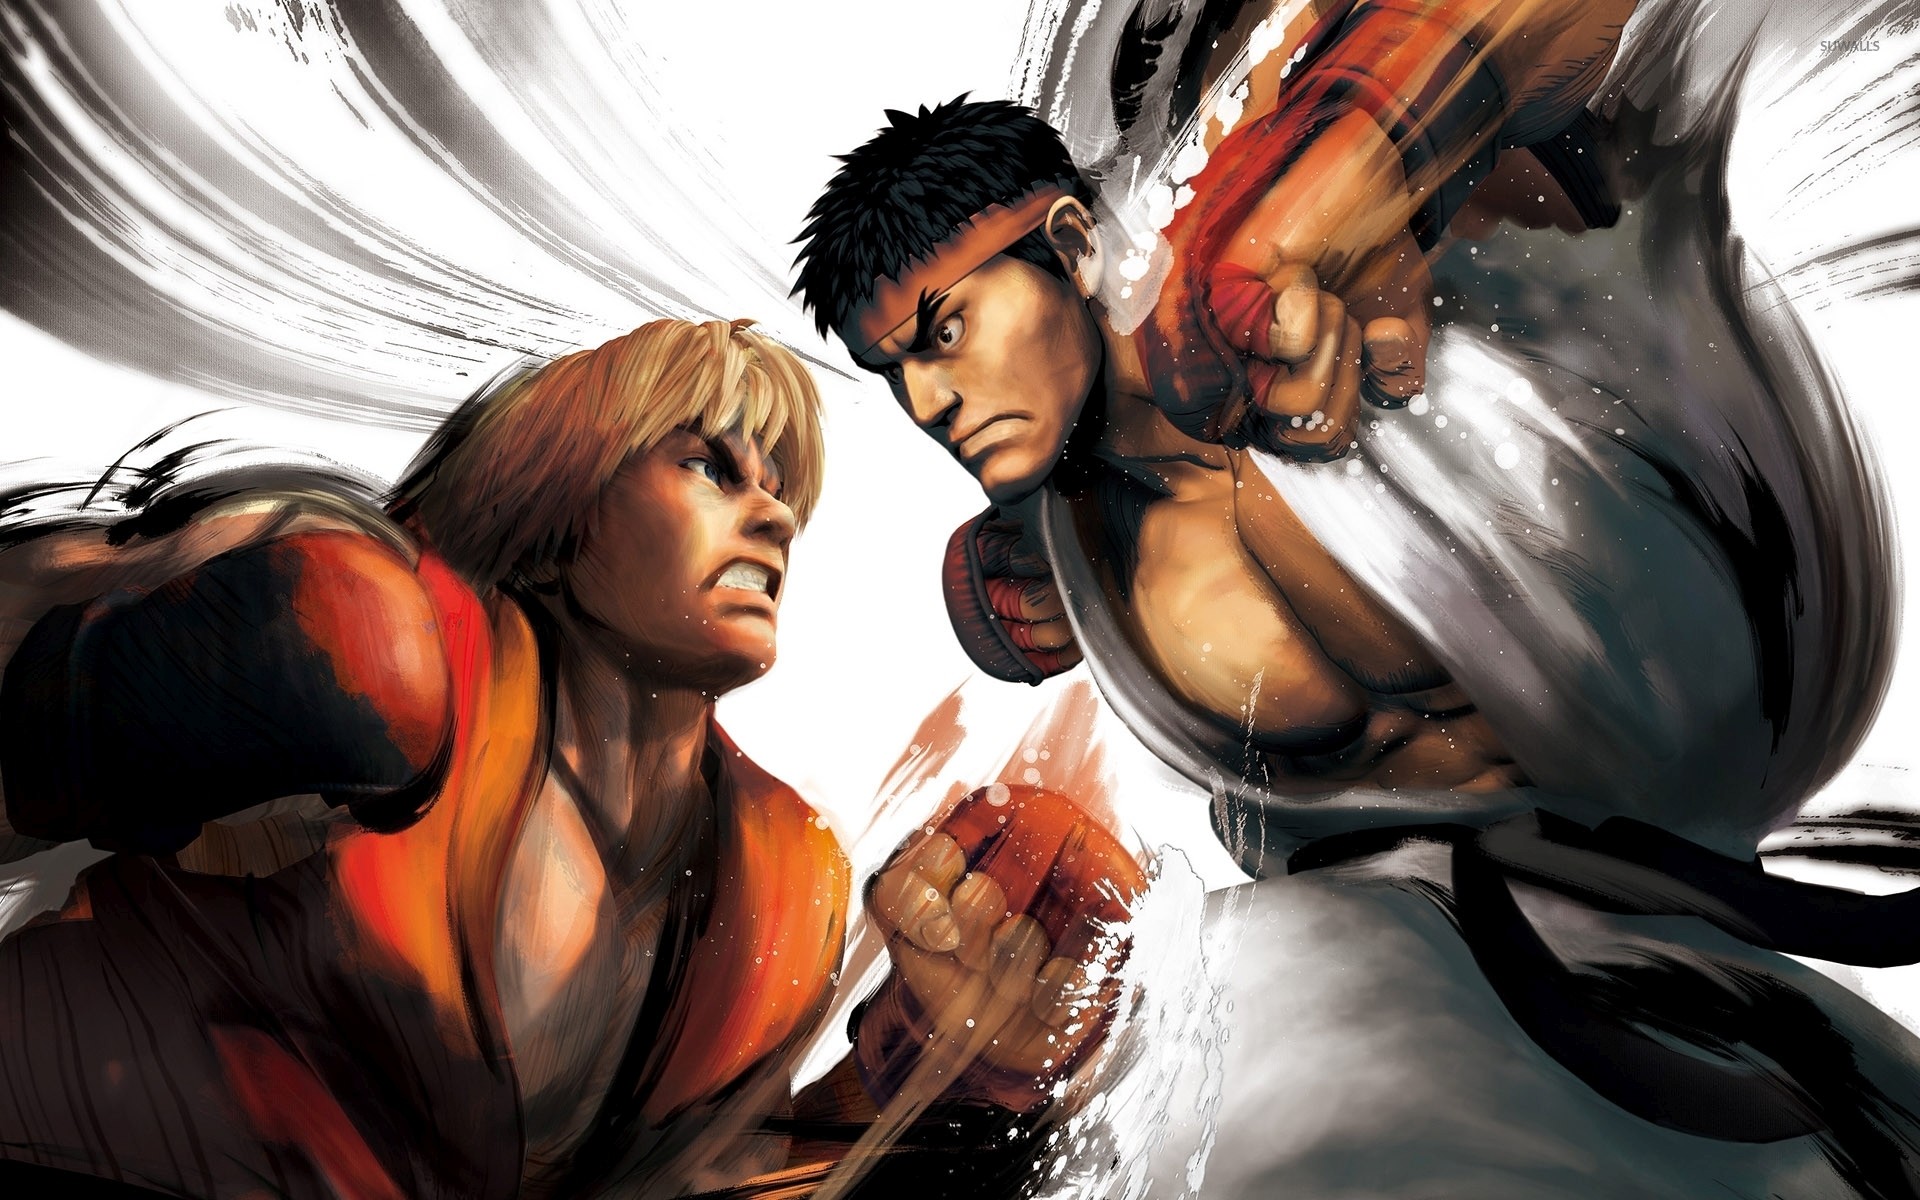 1920x1200 Sagat in Street Fighter | HD Games Wallpapers | Pinterest | Street fighter  and Gaming